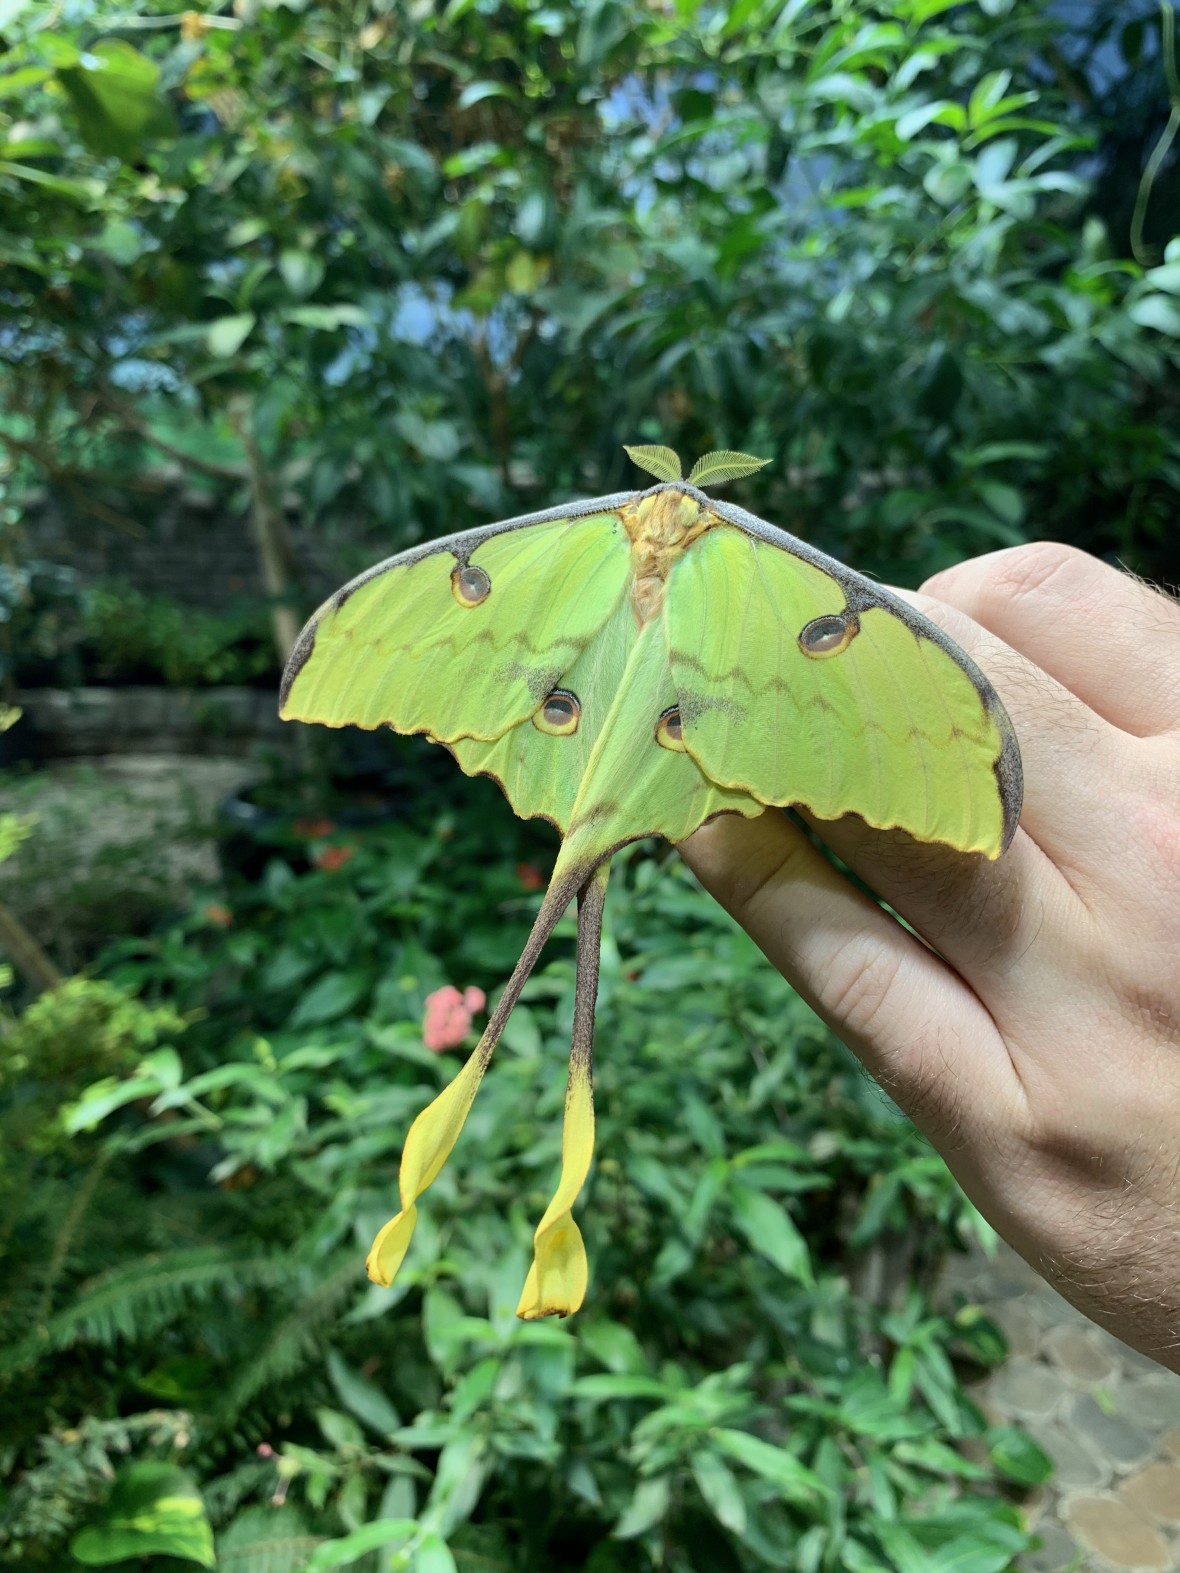 Hand outstretched with large green butterfly resting on it at the Long Island Aquarium